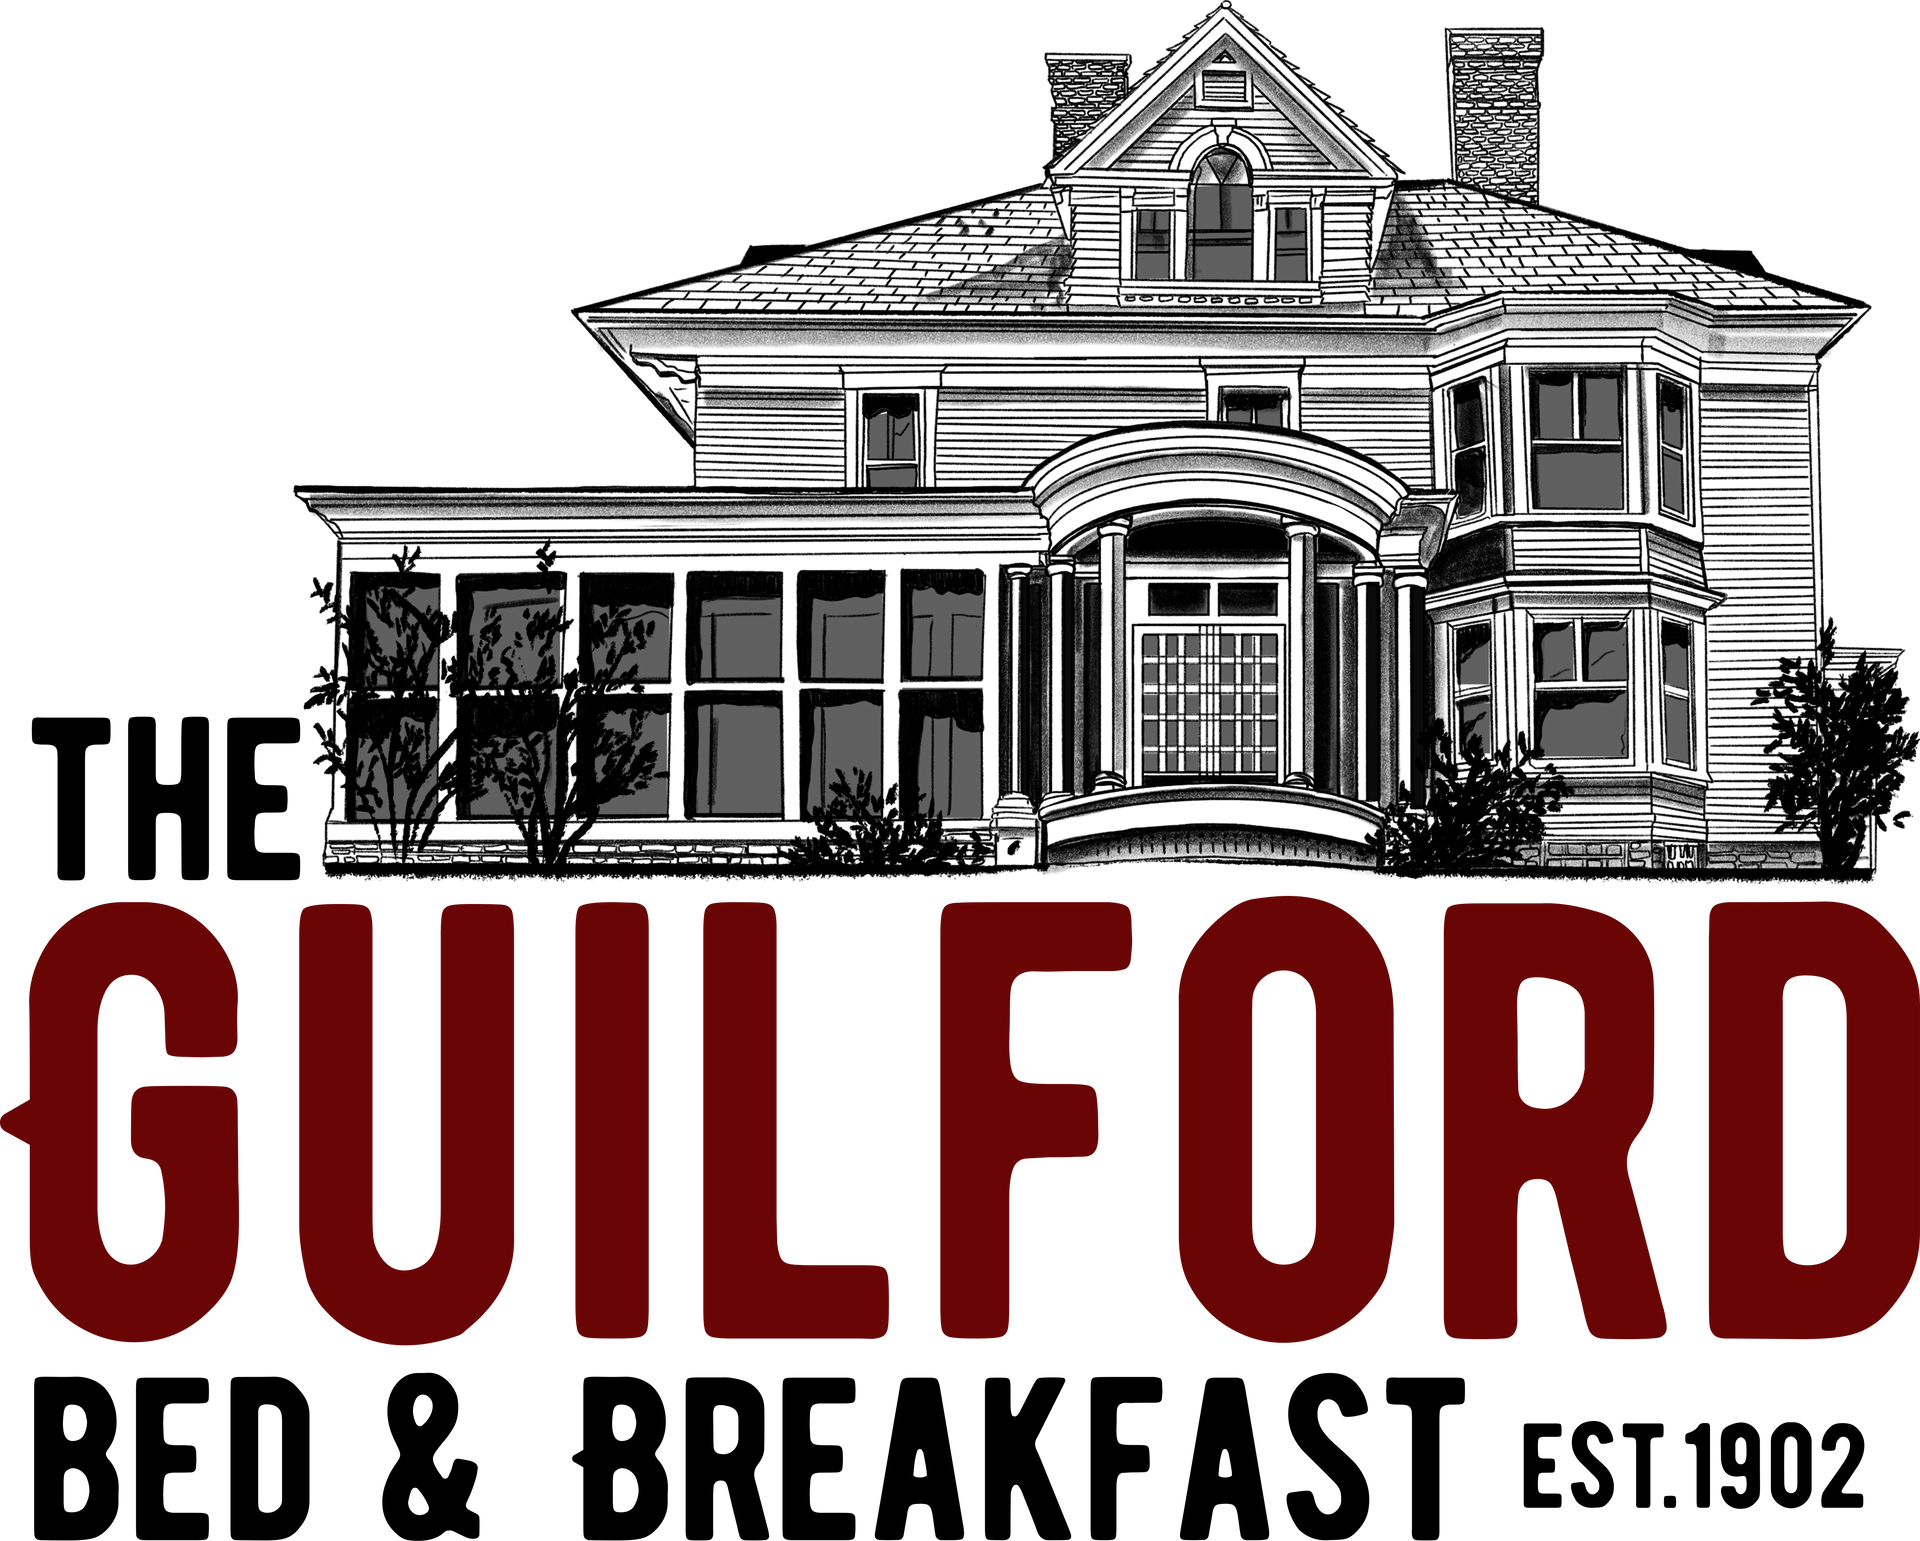 A black and white logo for the guilford bed and breakfast